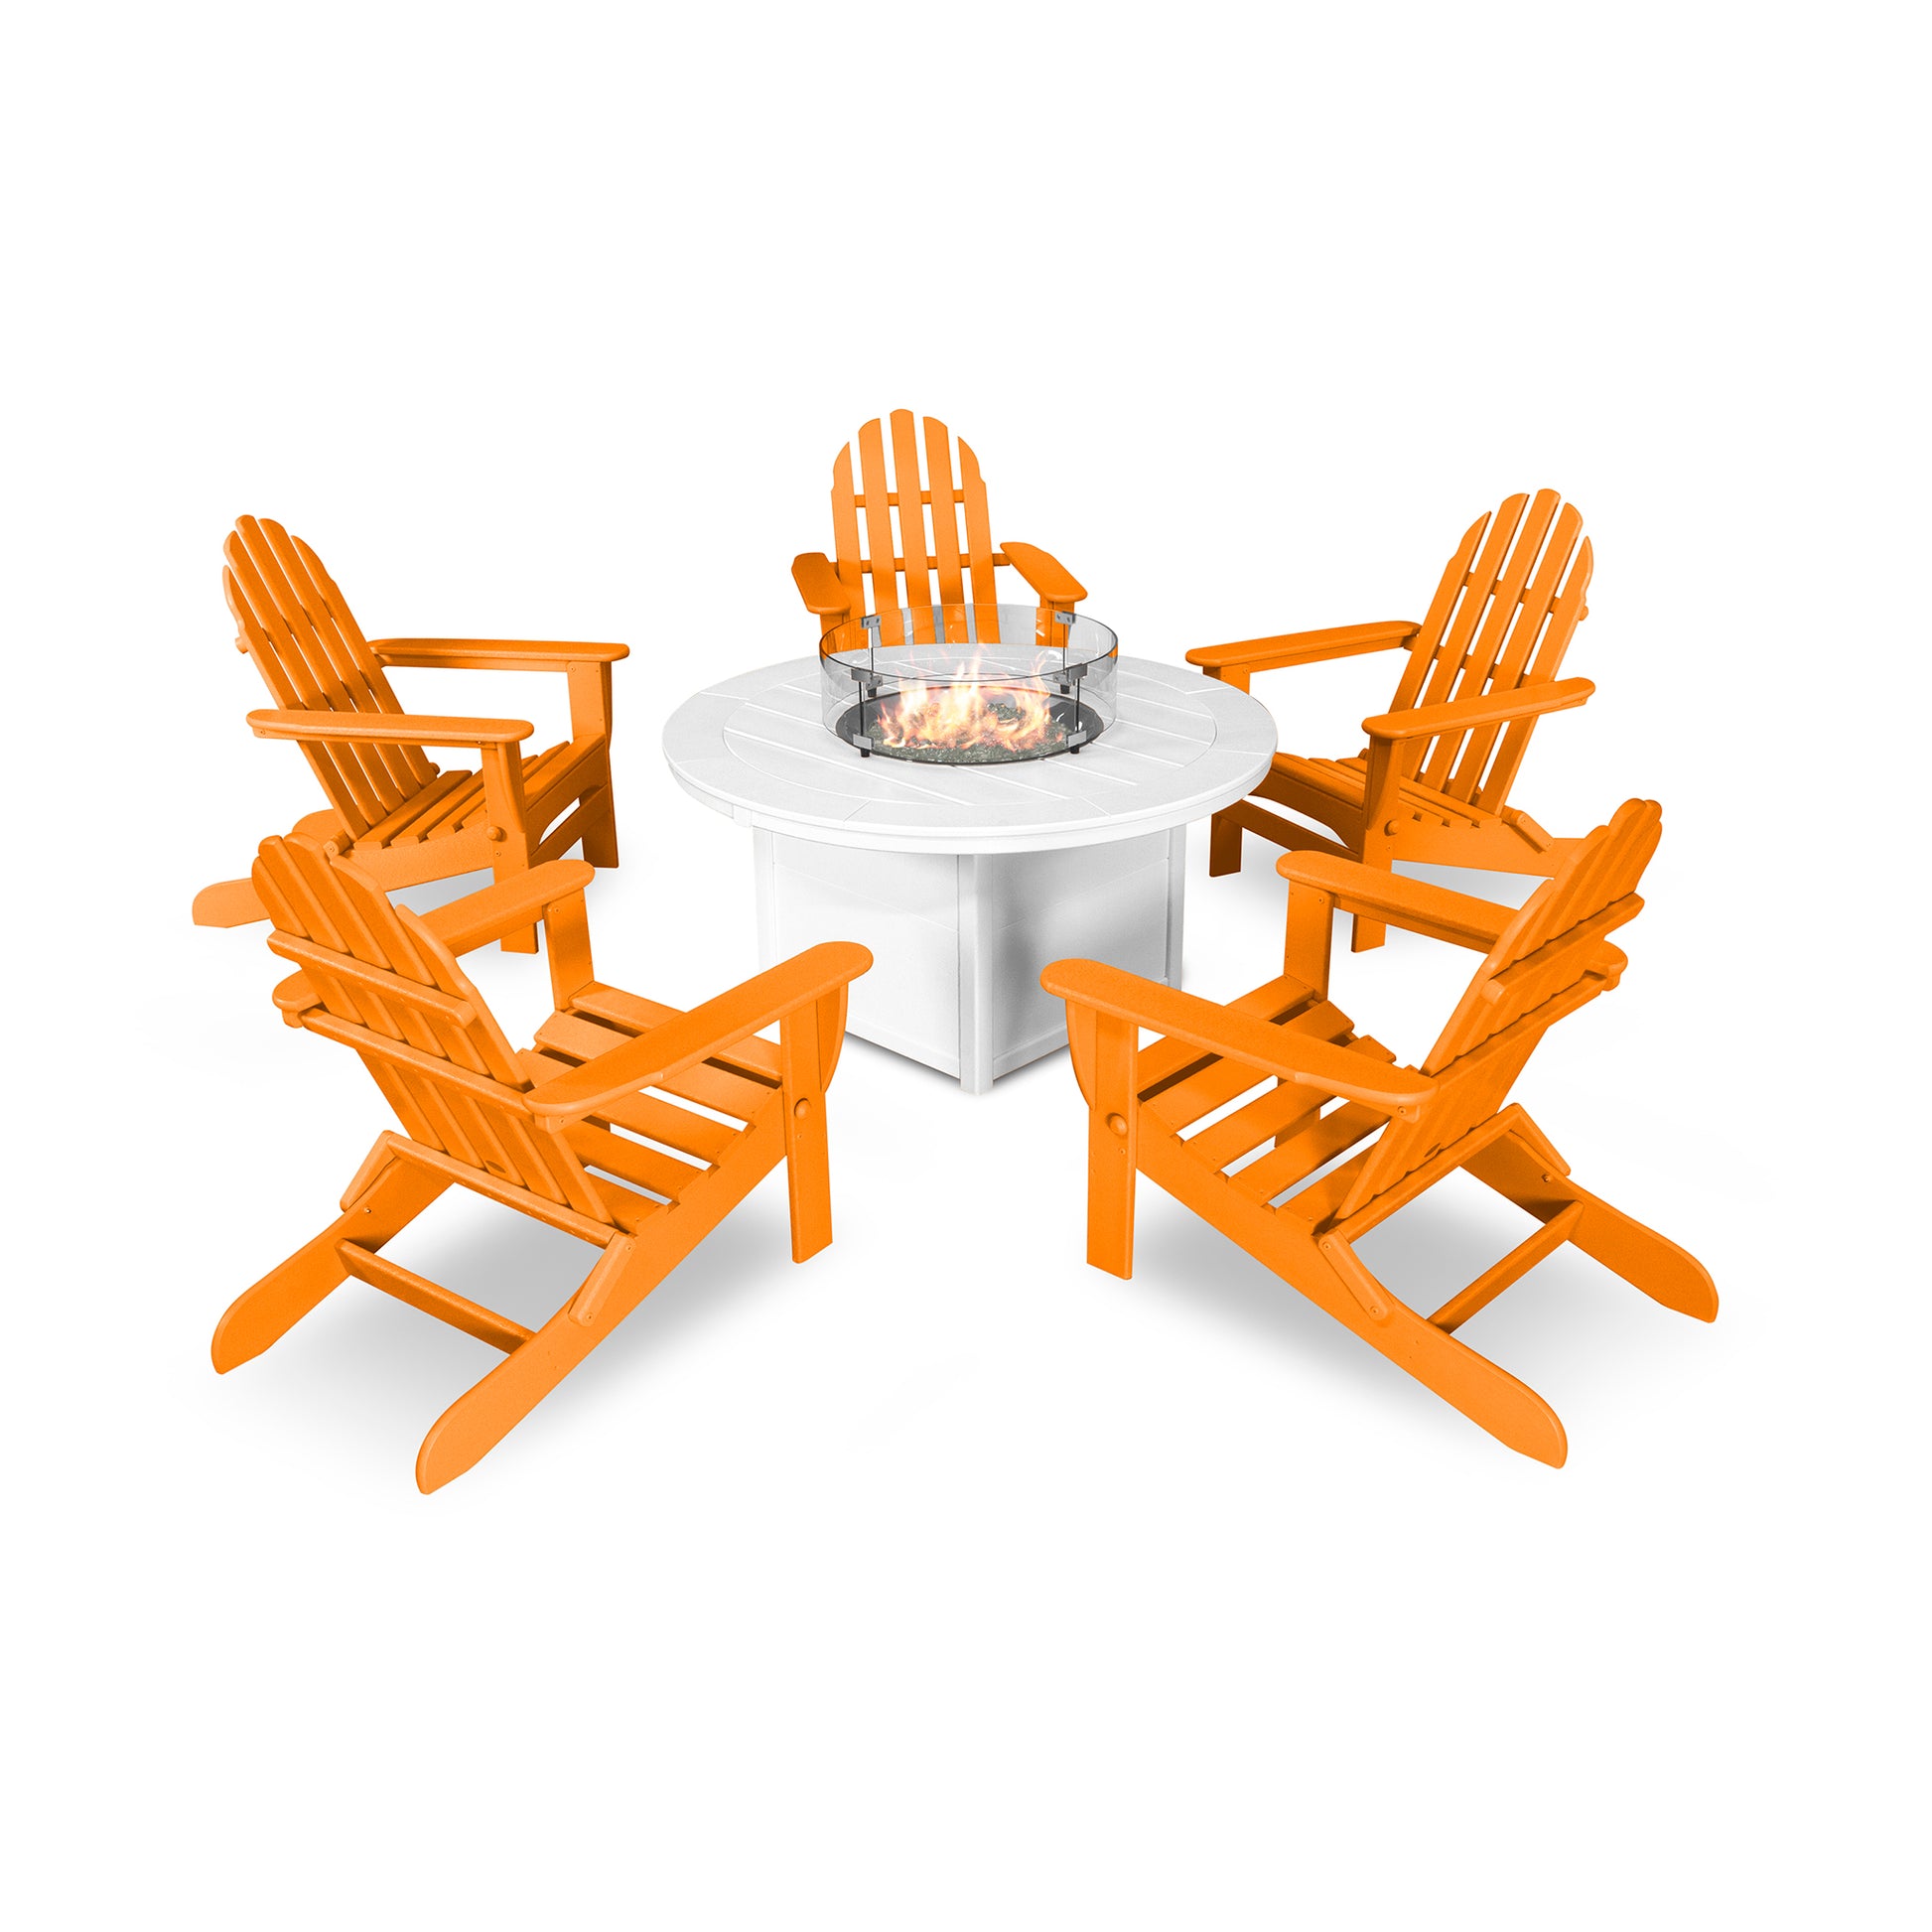 A set of four orange POLYWOOD Classic Folding Adirondack Chairs arranged around a white round POLYWOOD Fire Pit Table, all placed on a plain white background.